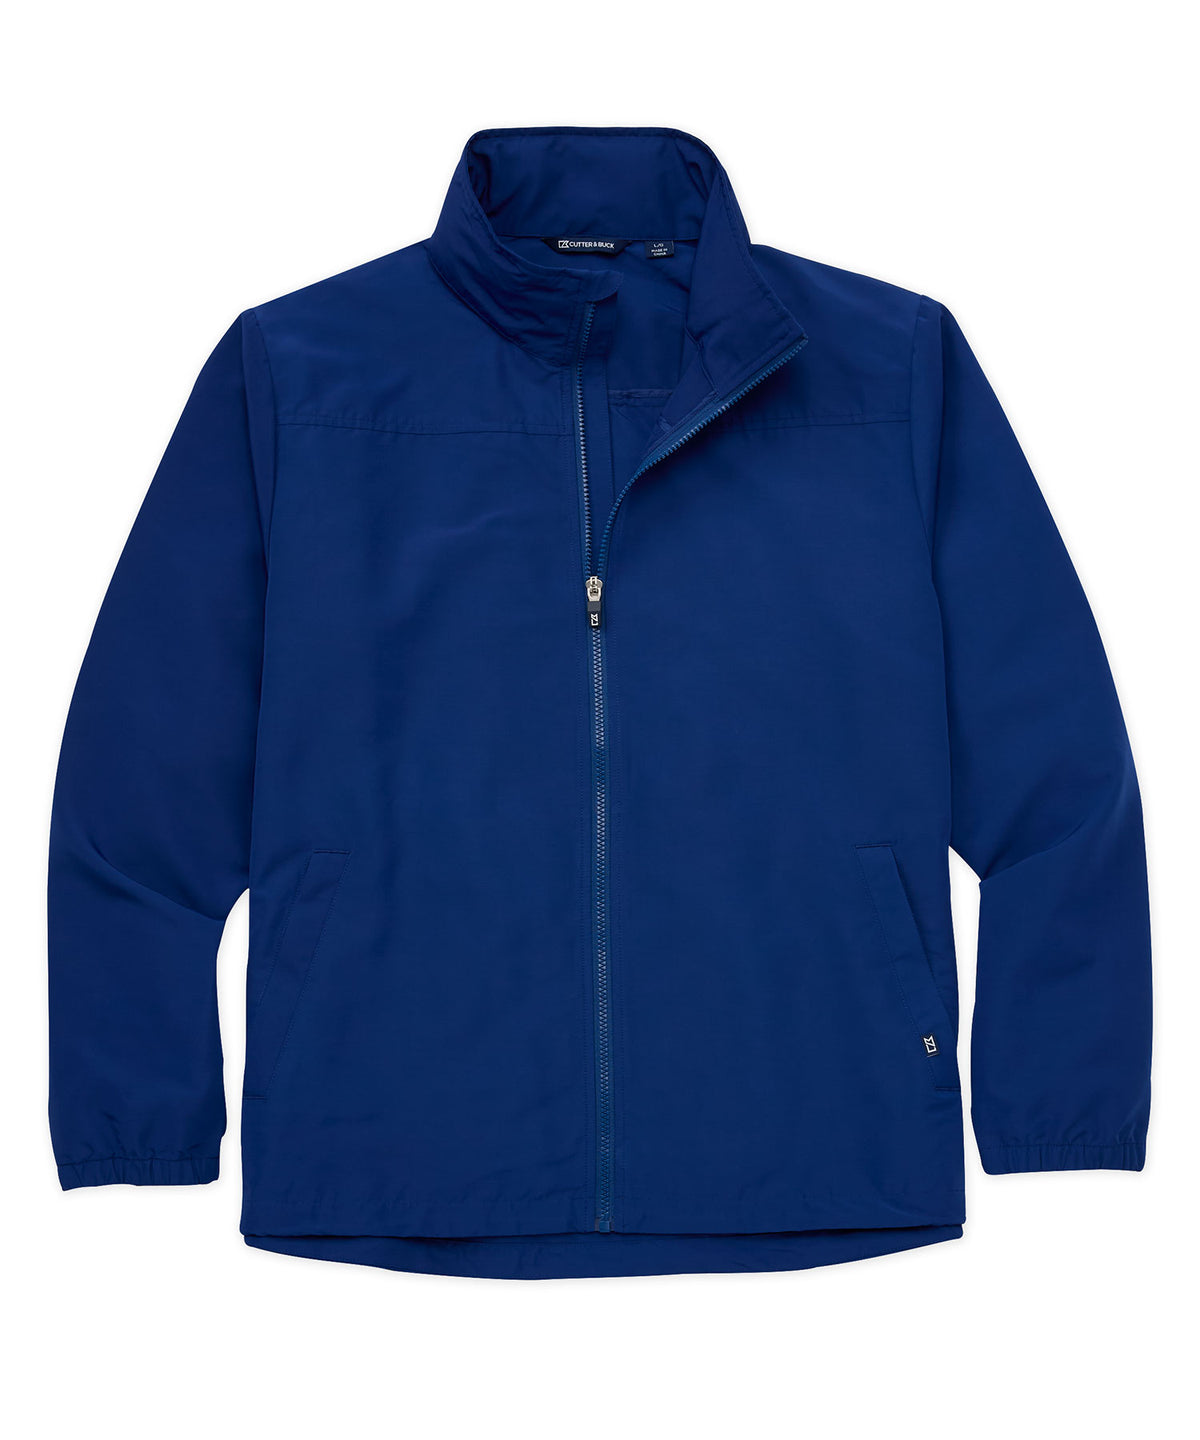 Cutter & Buck Charter Eco Knit Recycled Full-Zip Jacket, Men's Big & Tall